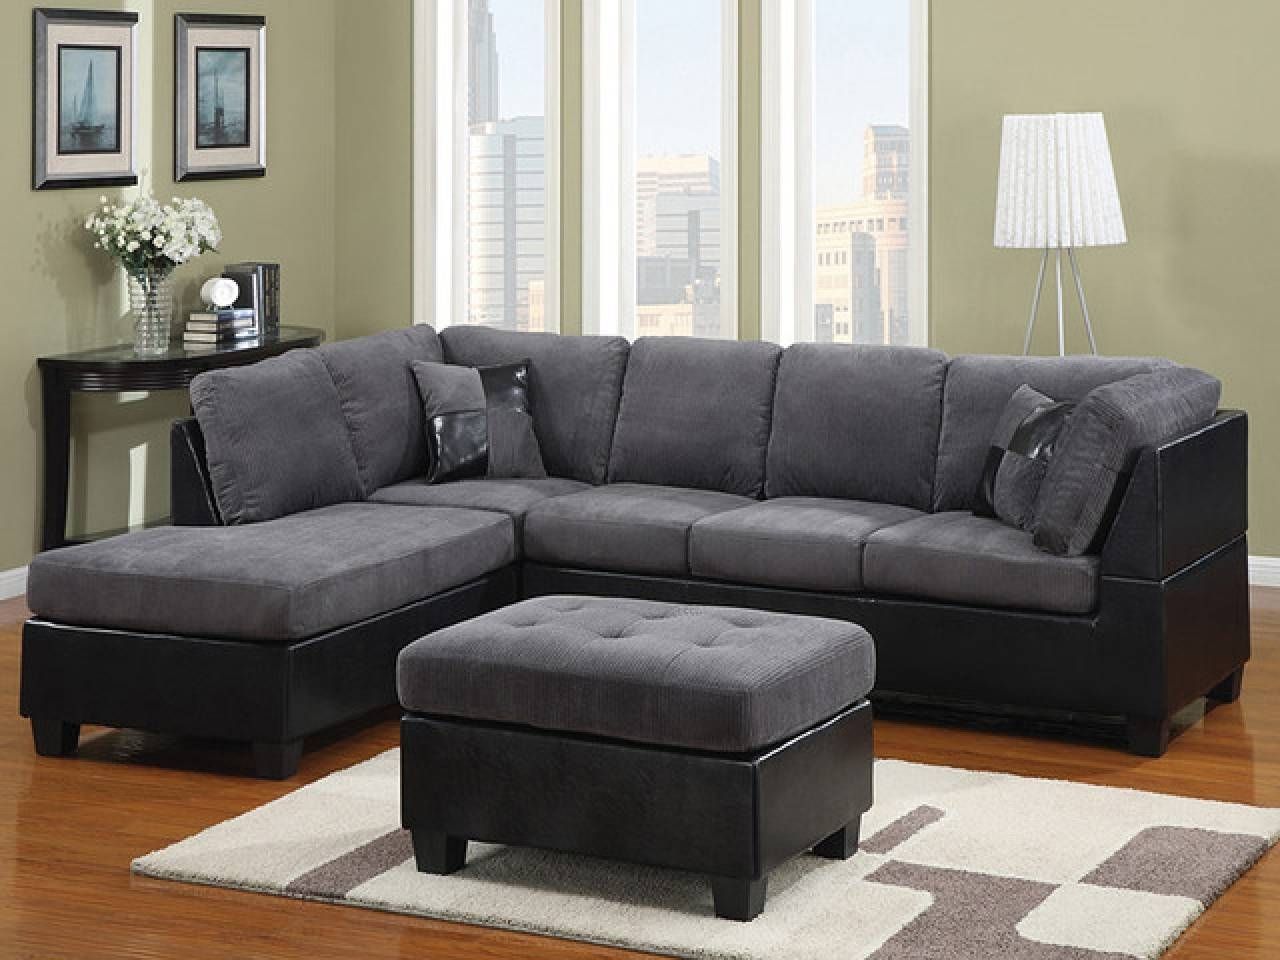 Trend Modular Sectional Sofa Microfiber 16 About Remodel Sectional Inside Black Microfiber Sectional Sofas (View 11 of 15)